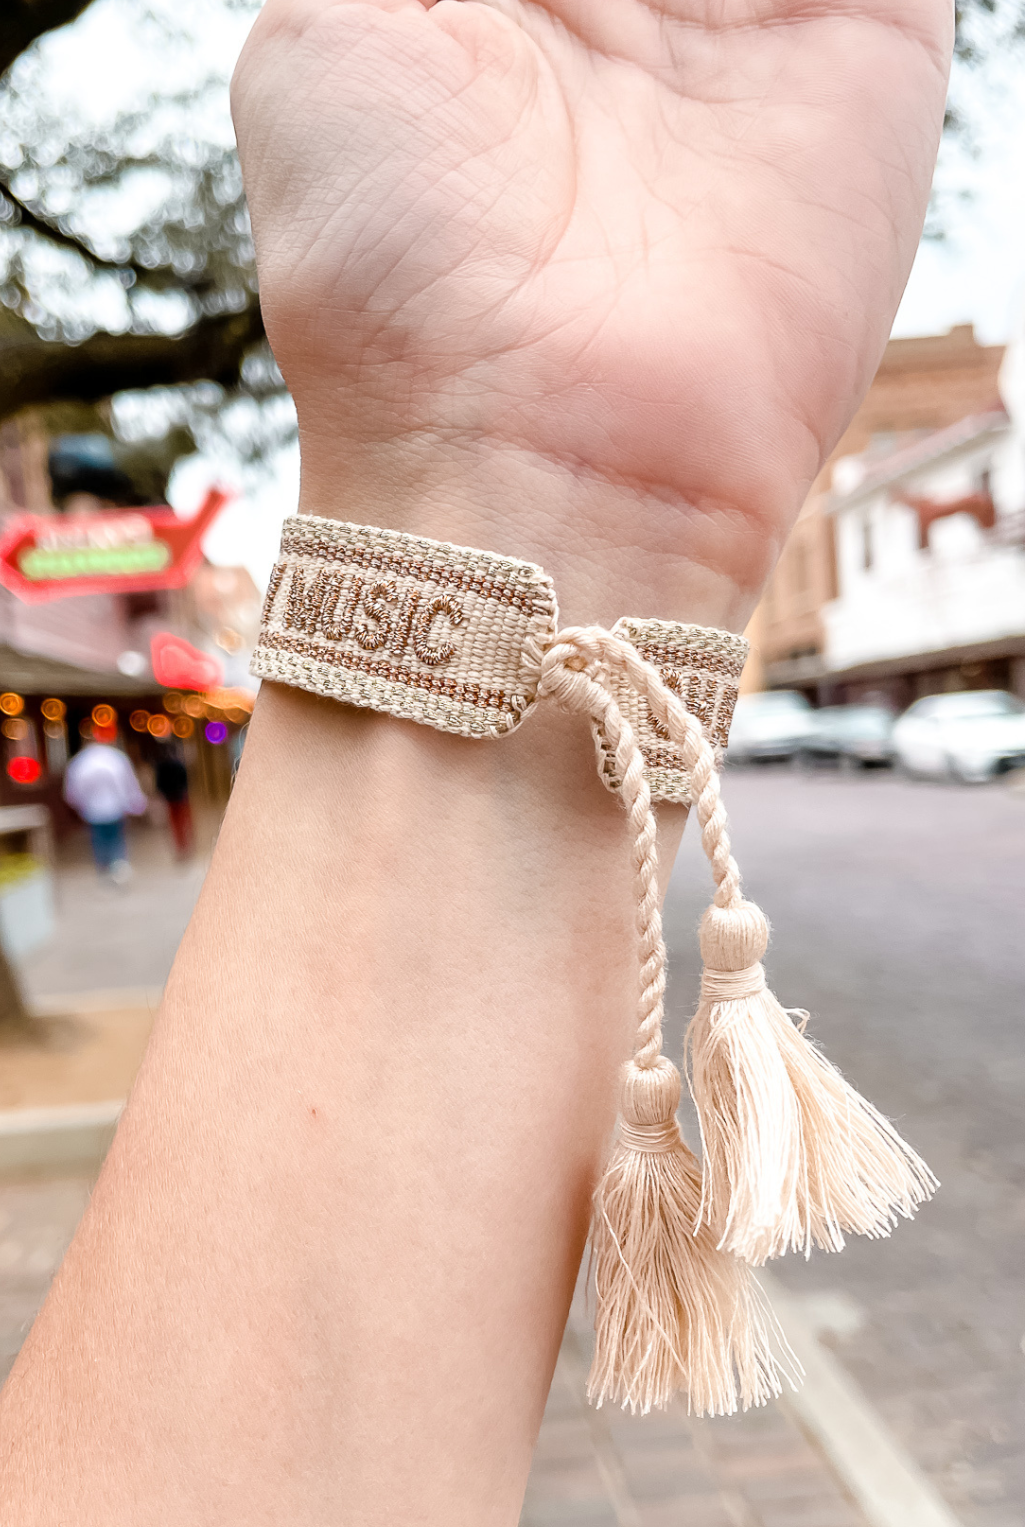 Champagne And Country Music Tassel Bracelet